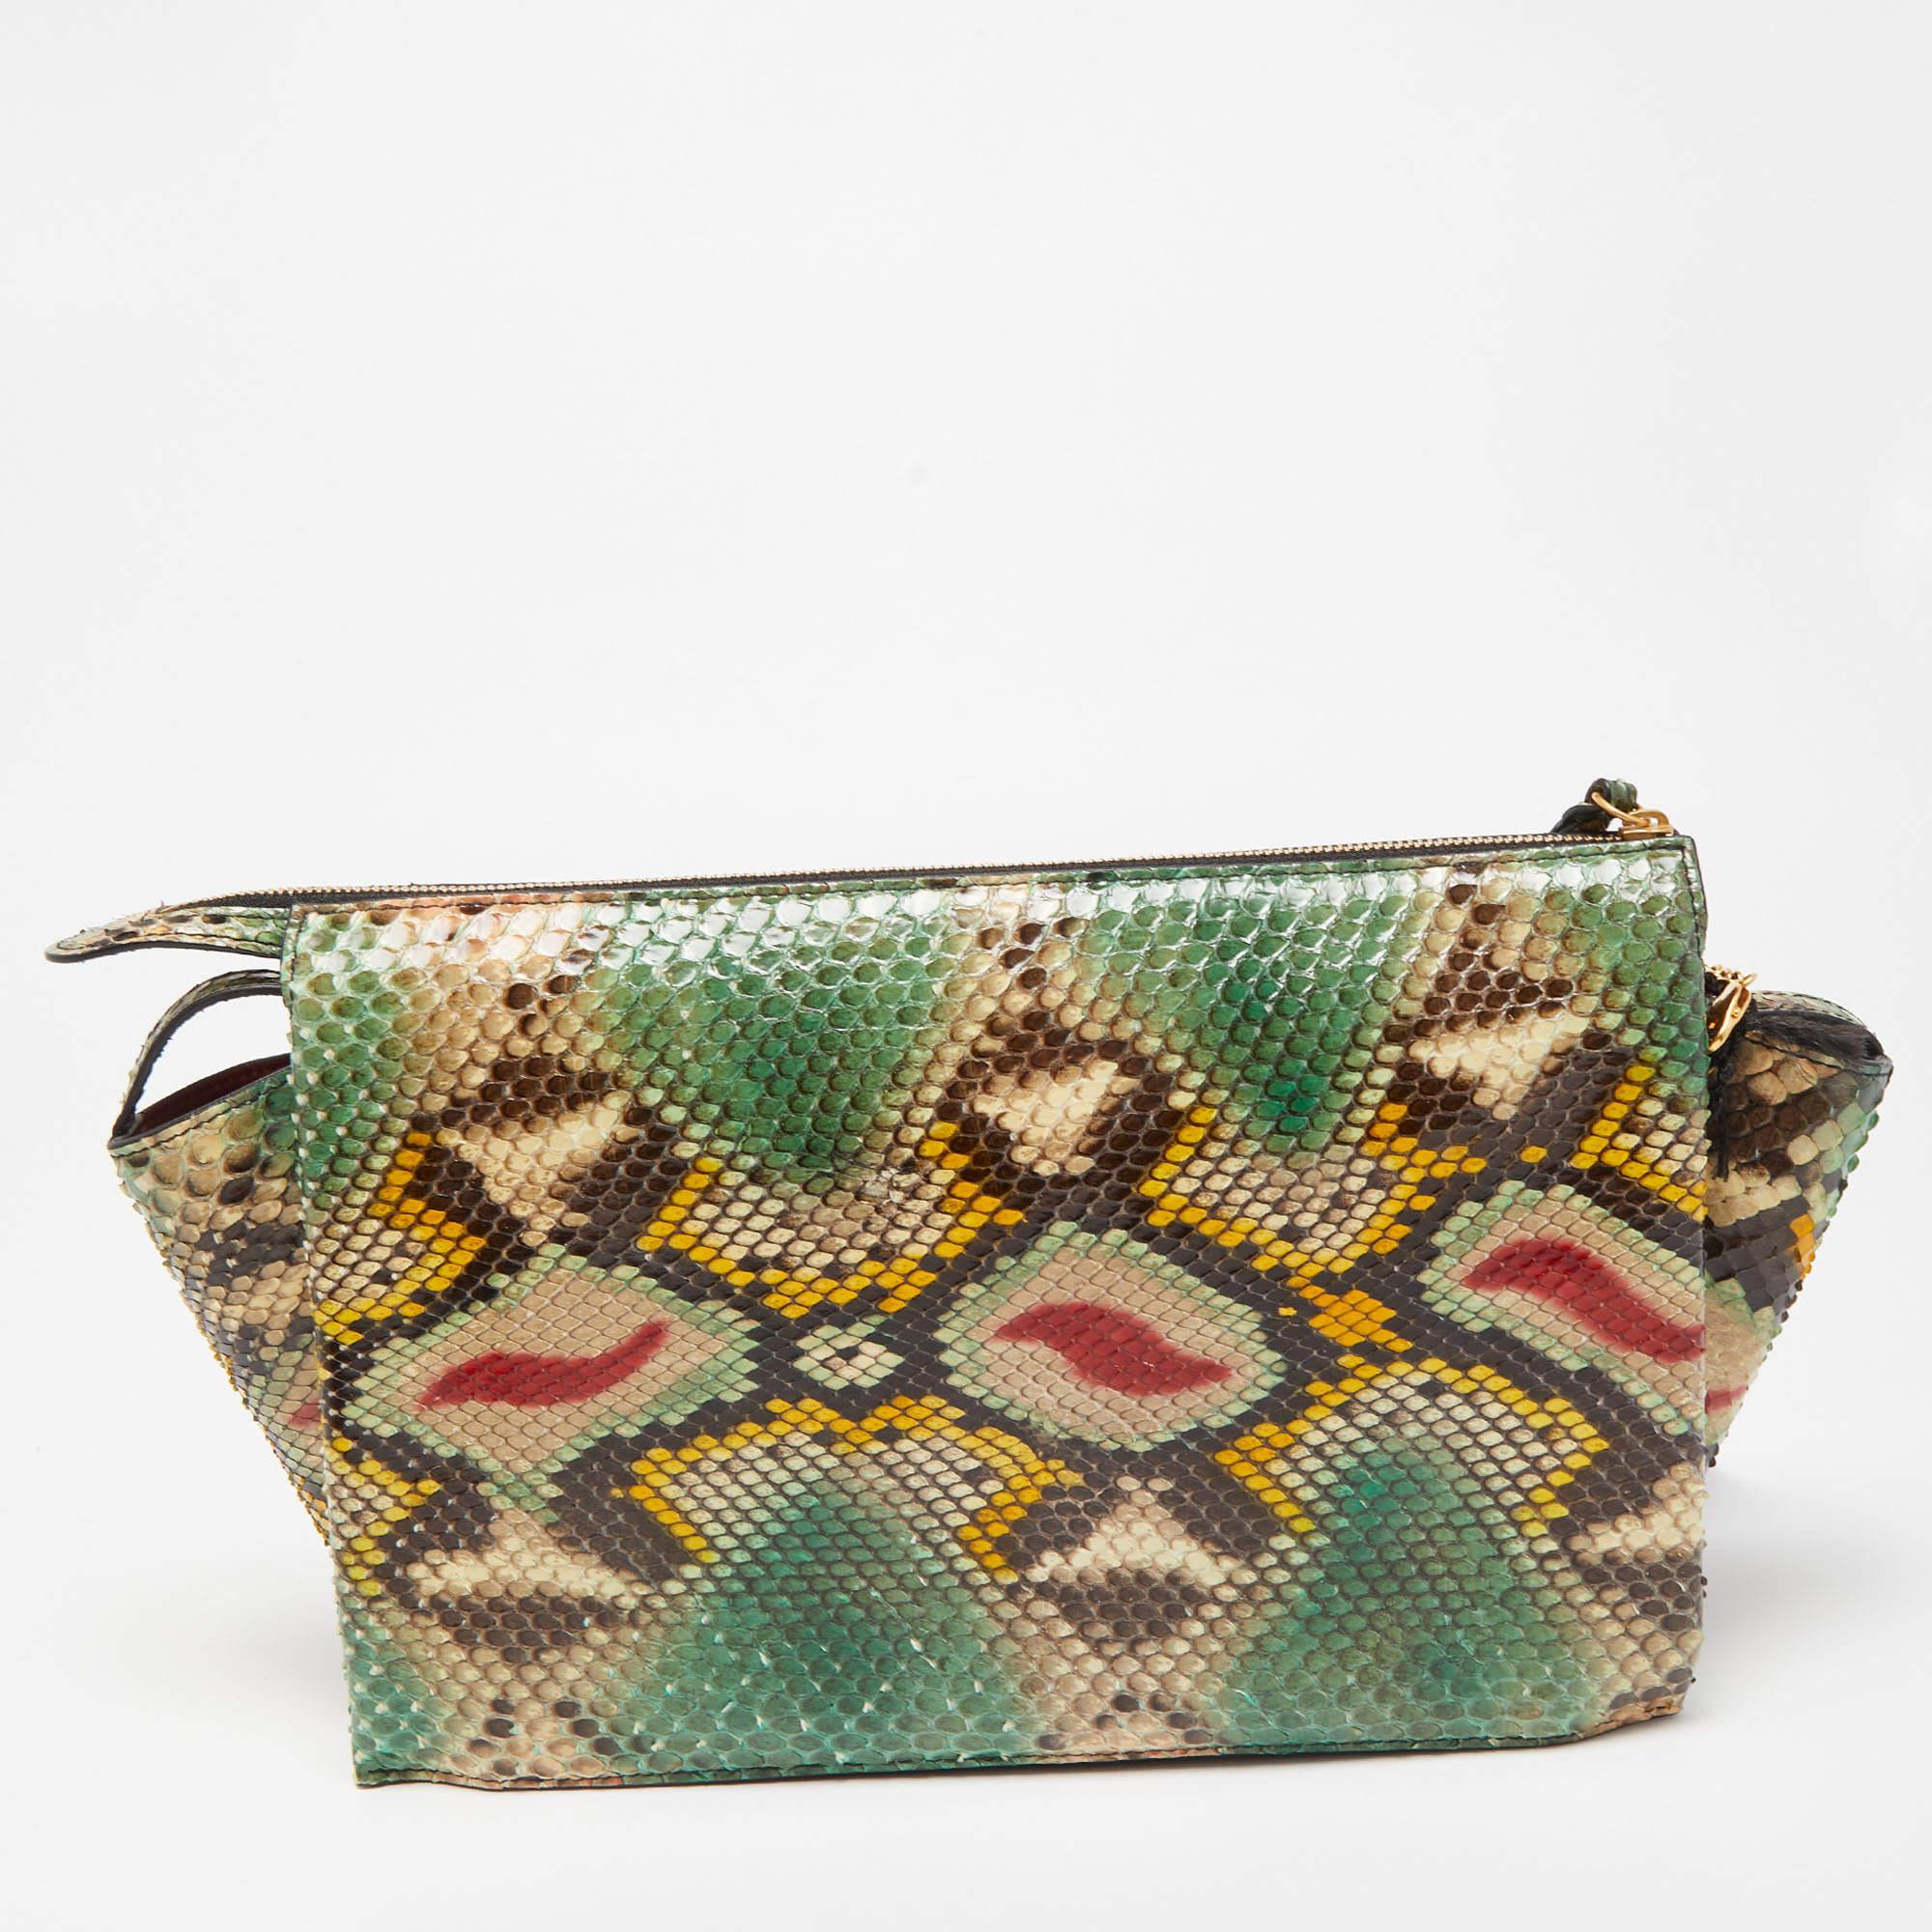 This clutch is just the right accessory to compliment your chic ensemble. It comes crafted in quality material featuring a well-sized interior that can comfortably hold all your little essentials.

